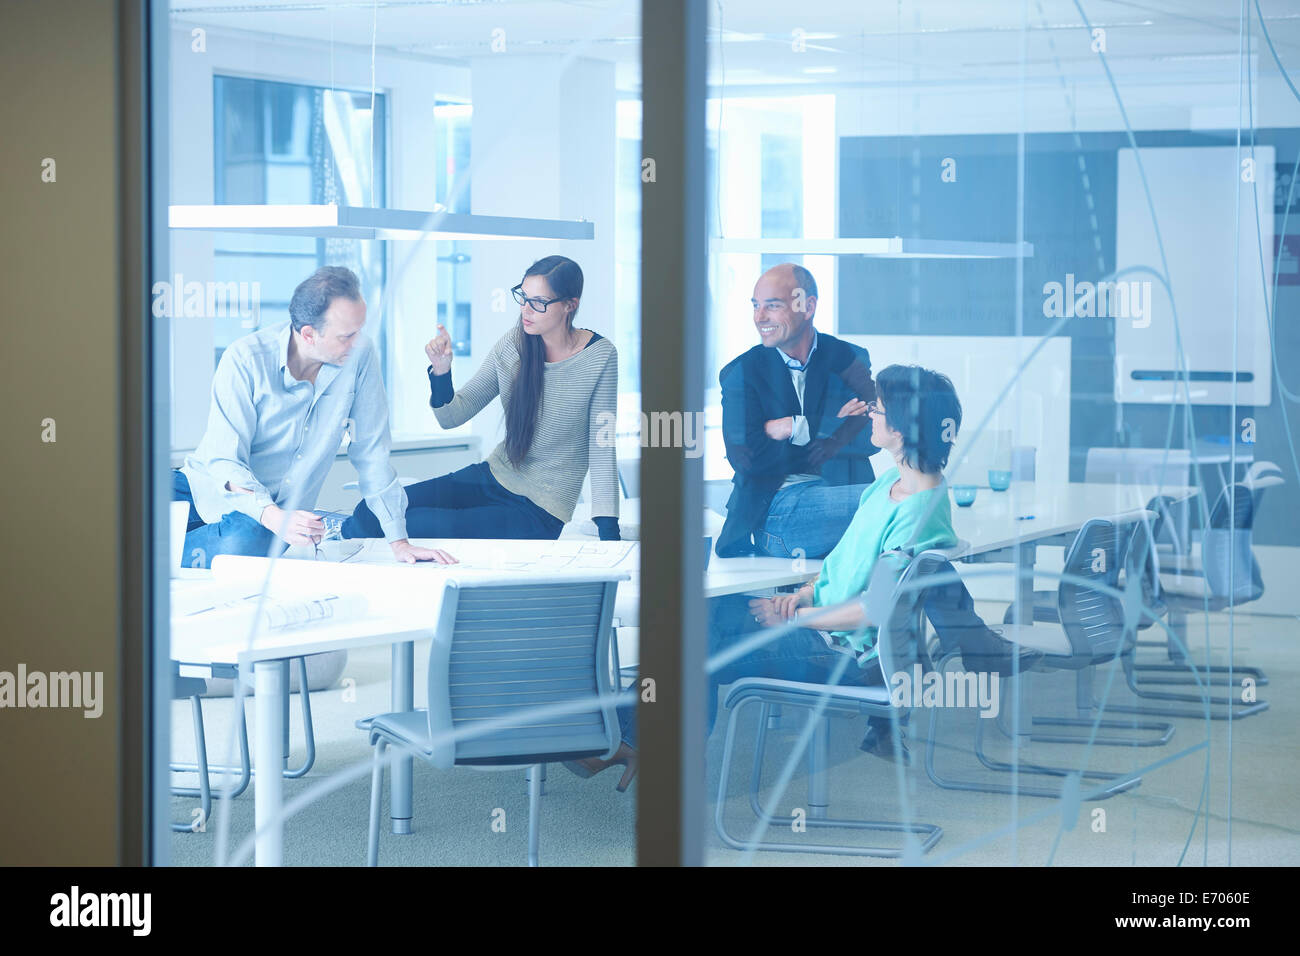 Group of business people having discussion Stock Photo